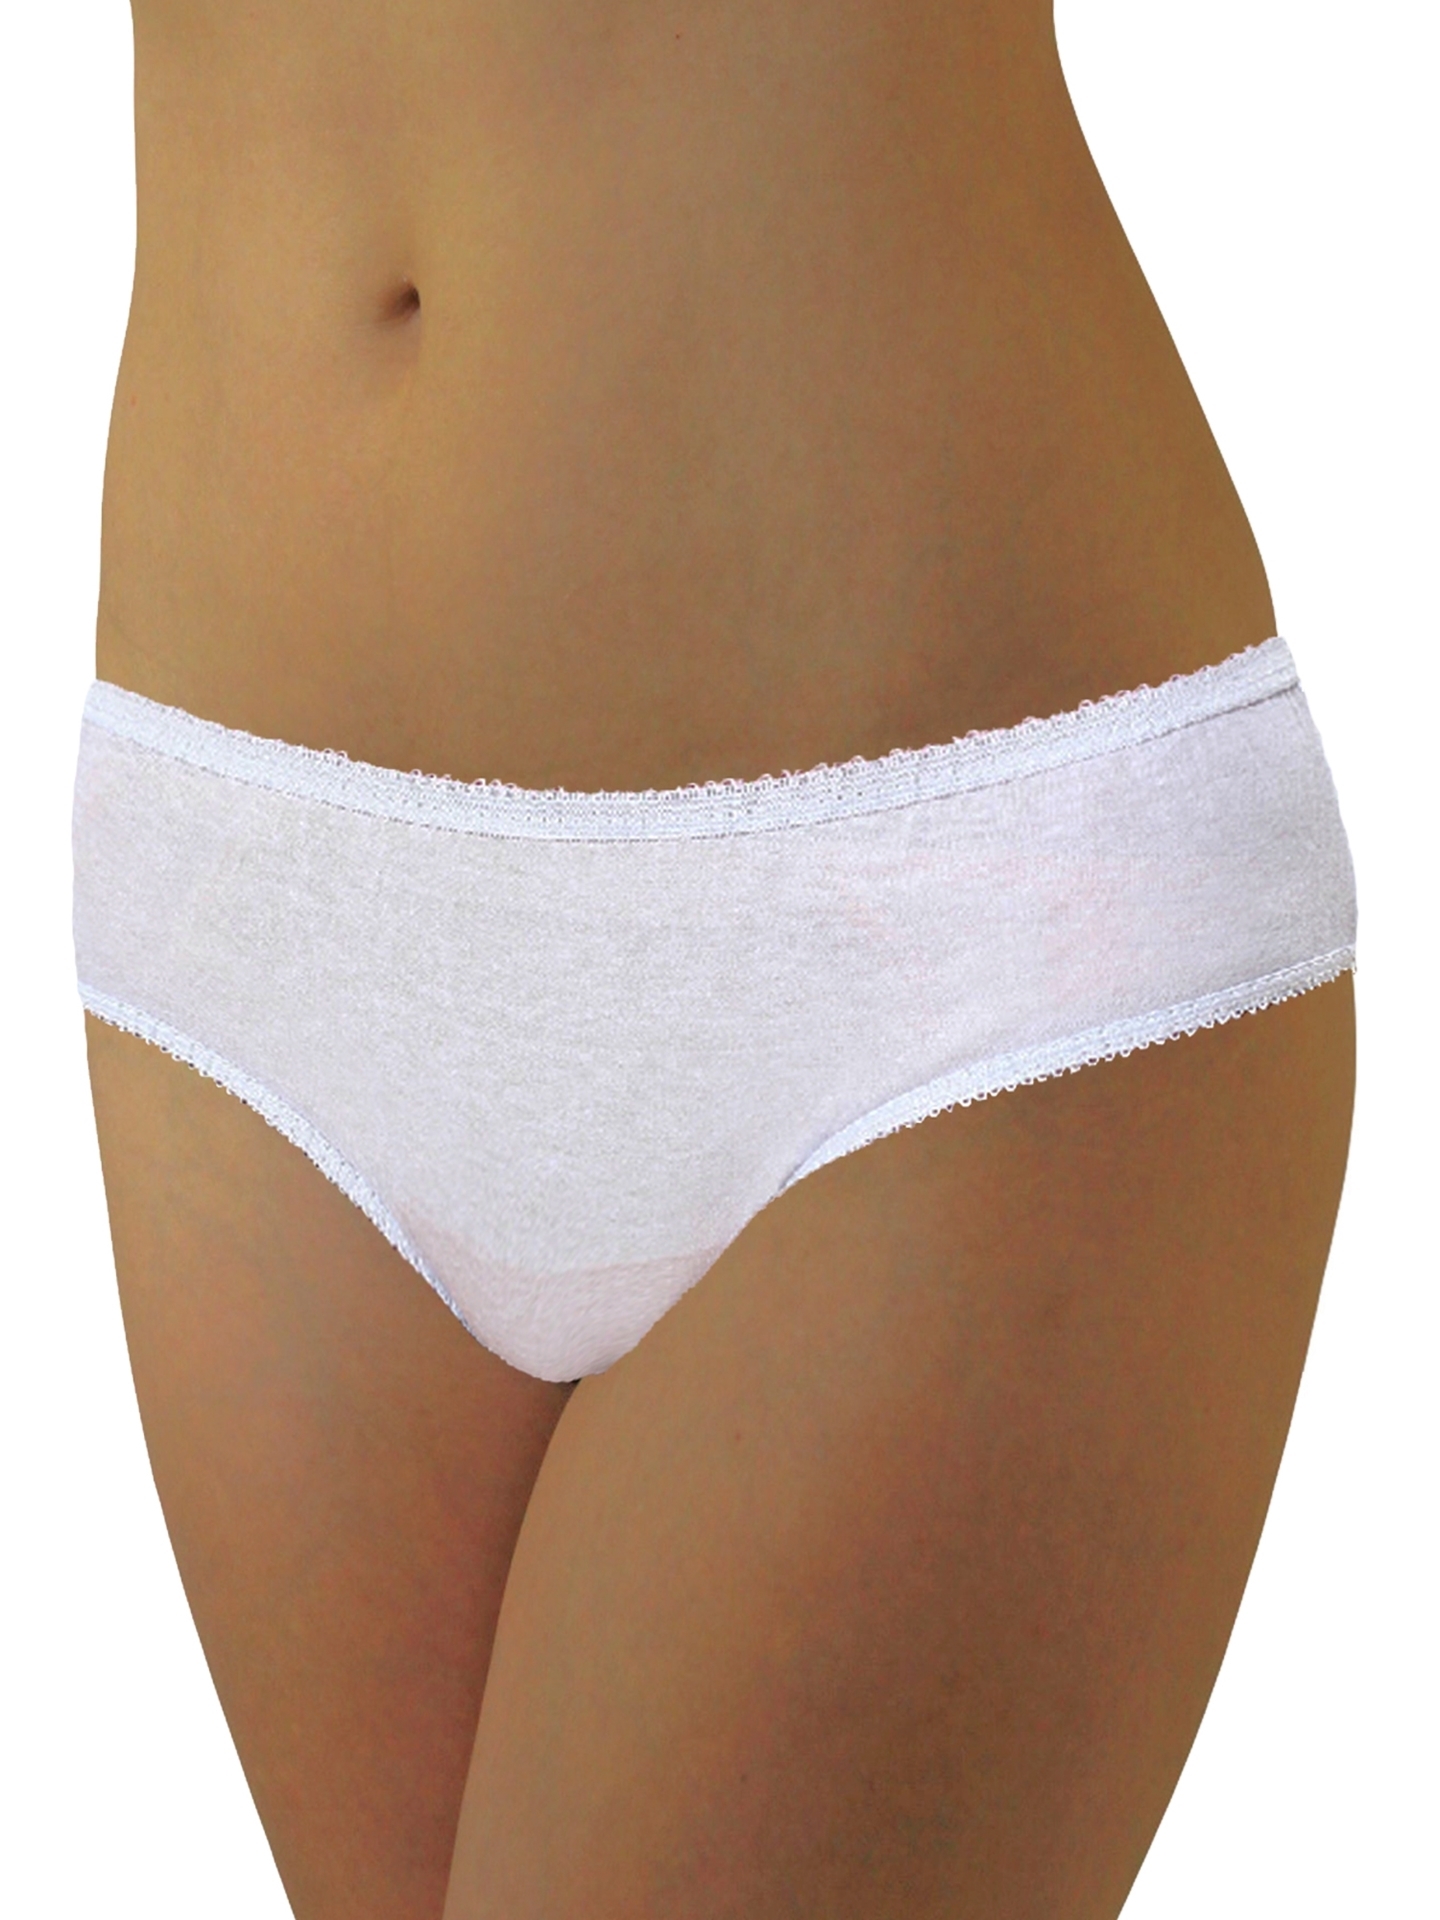 Disposable underwear for women, travel, sterile shorts, business